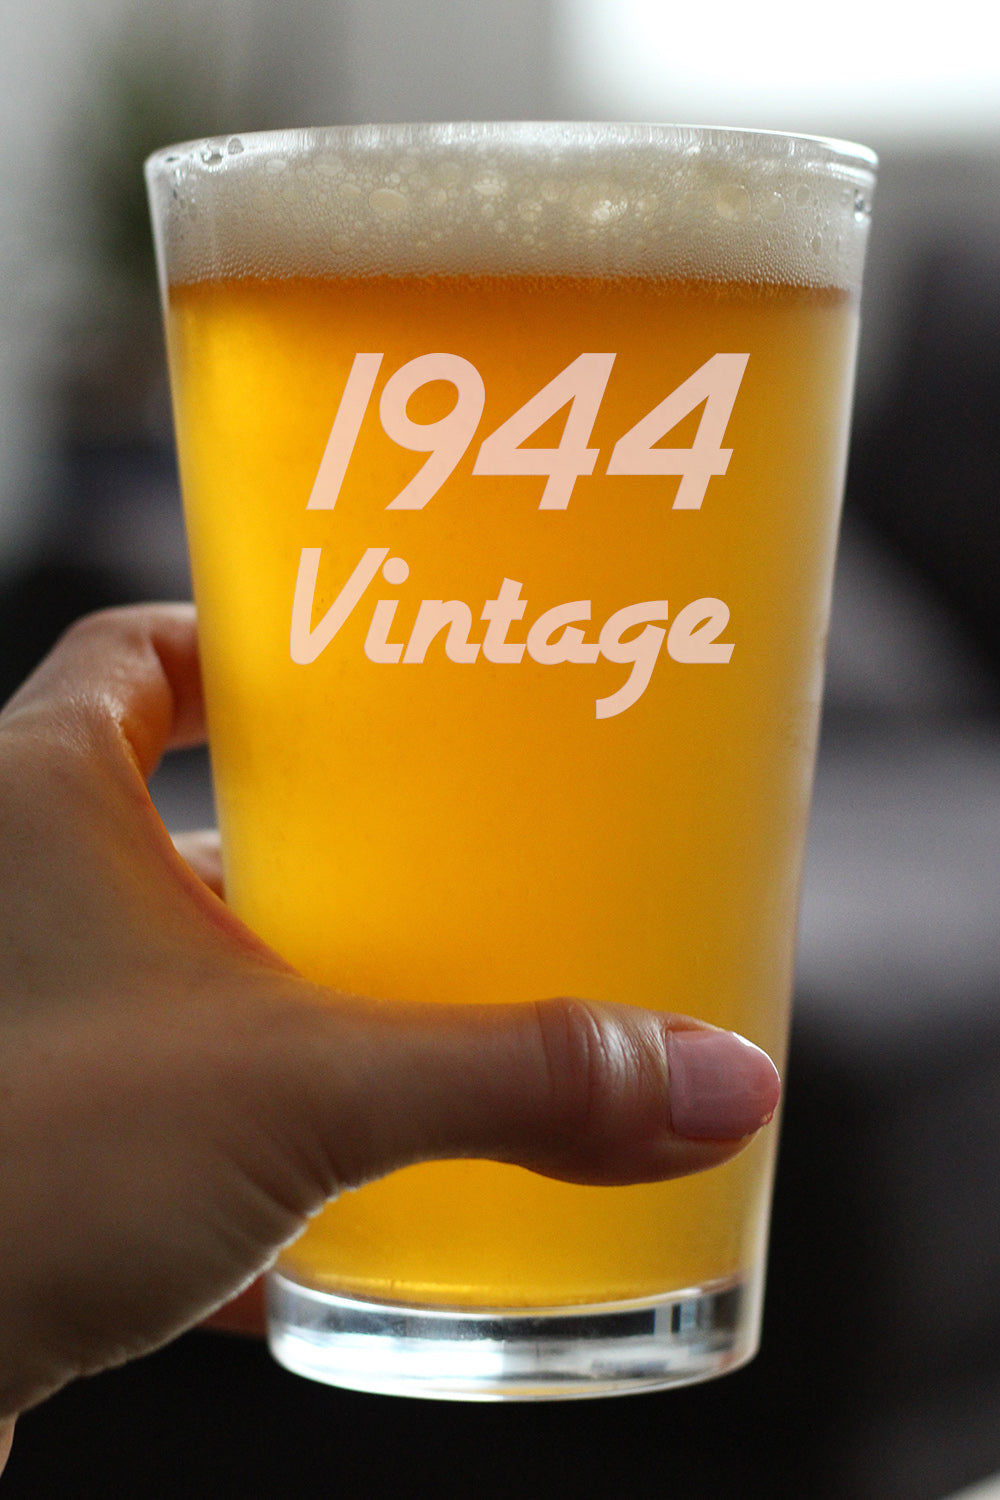 Vintage 1944 - Pint Glass for Beer - 80th Birthday Gifts for Men or Women Turning 80 - Fun Bday Party Decor - 16 oz